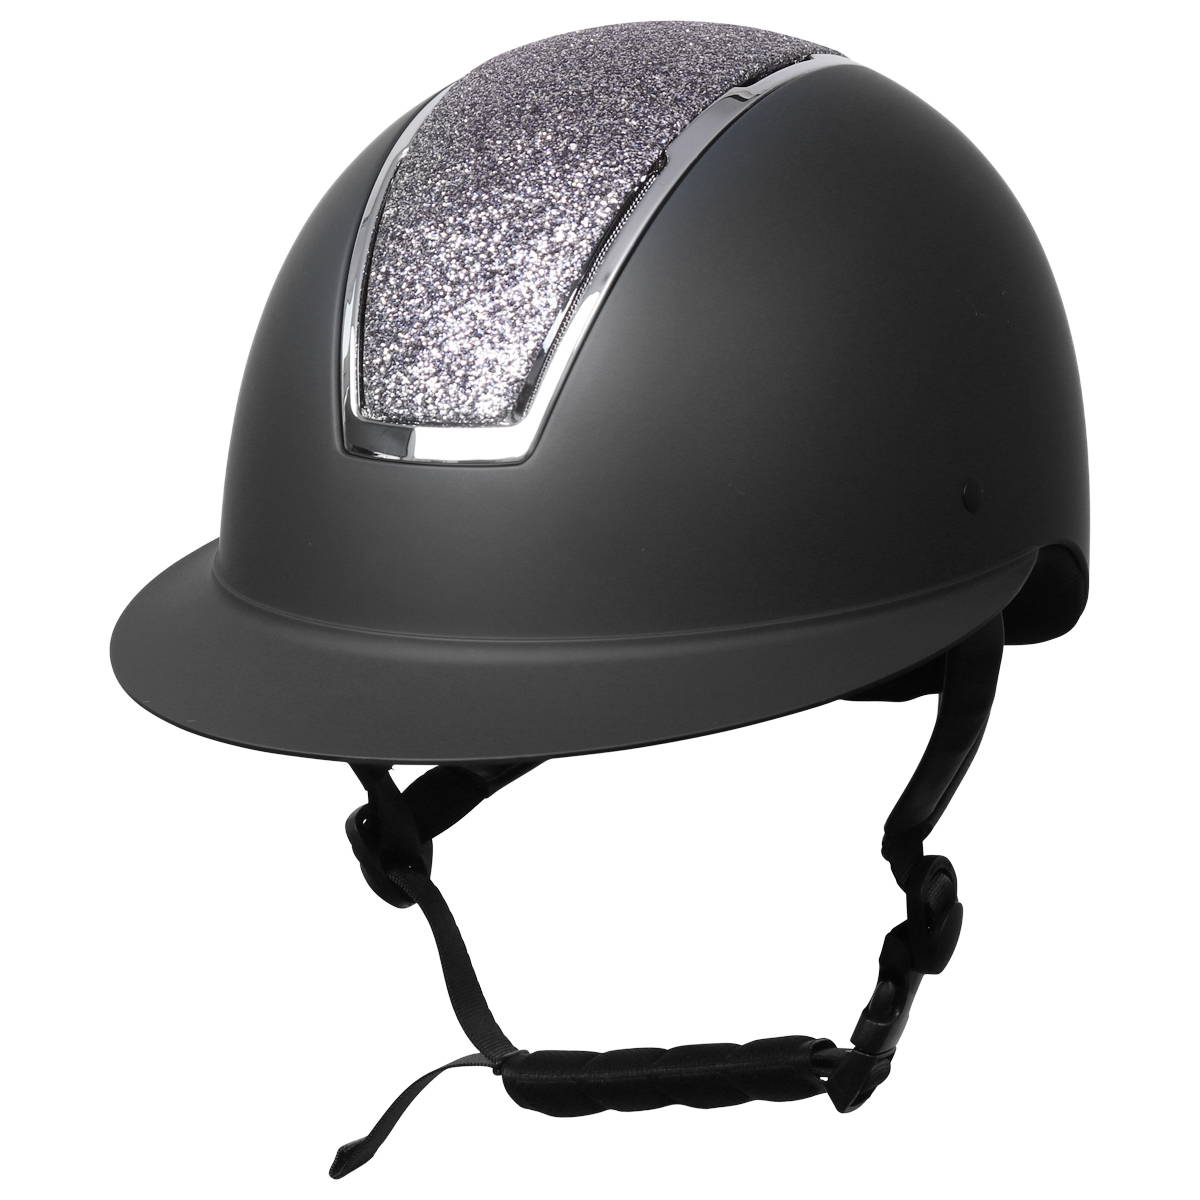 RIDING HAT COVER SILVER GREY & BLACK 